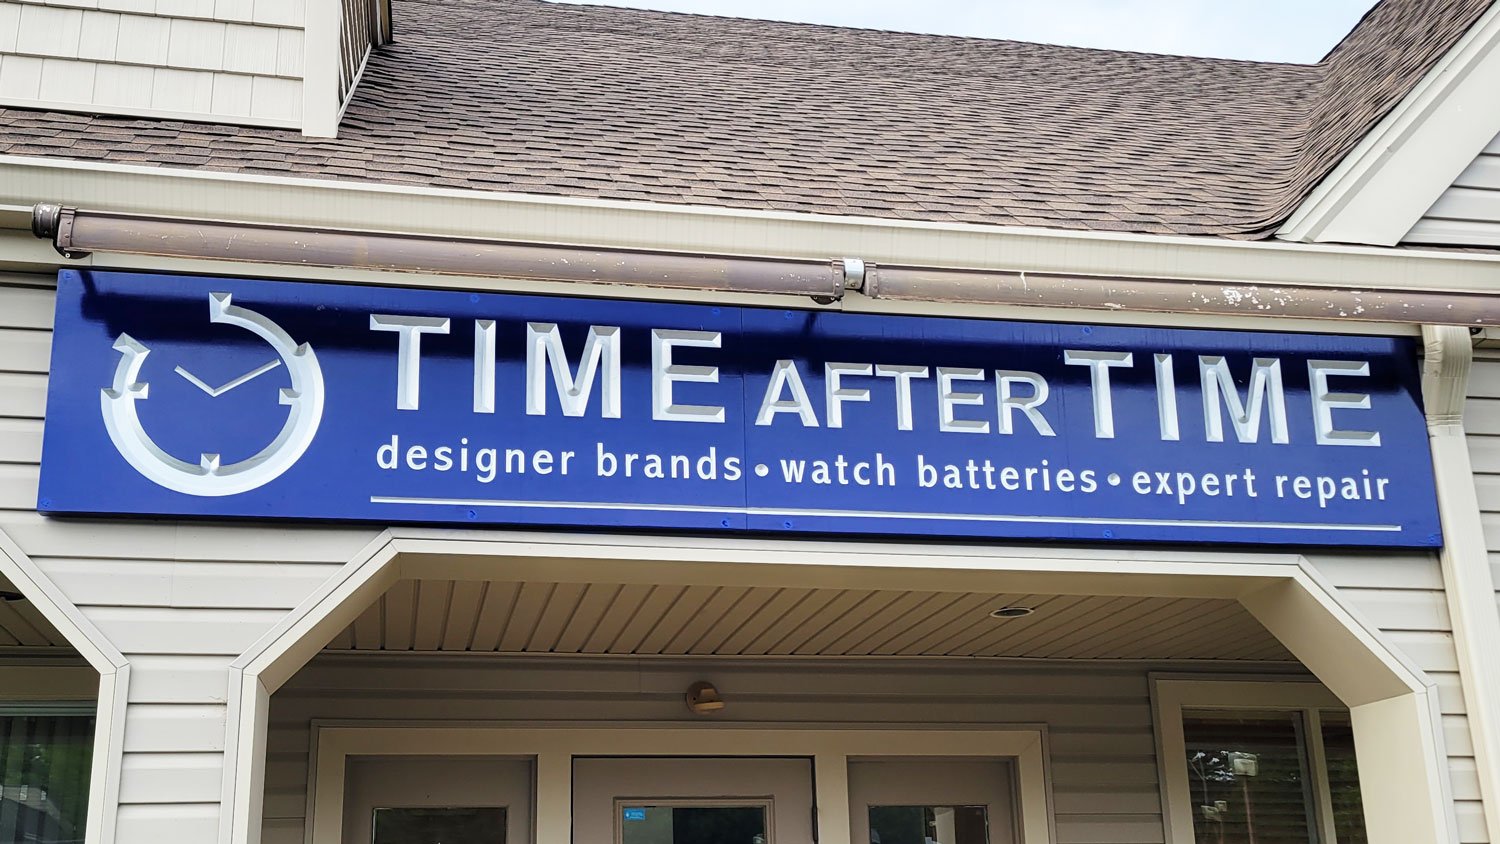 outdoorsigns-timeaftertime.jpg